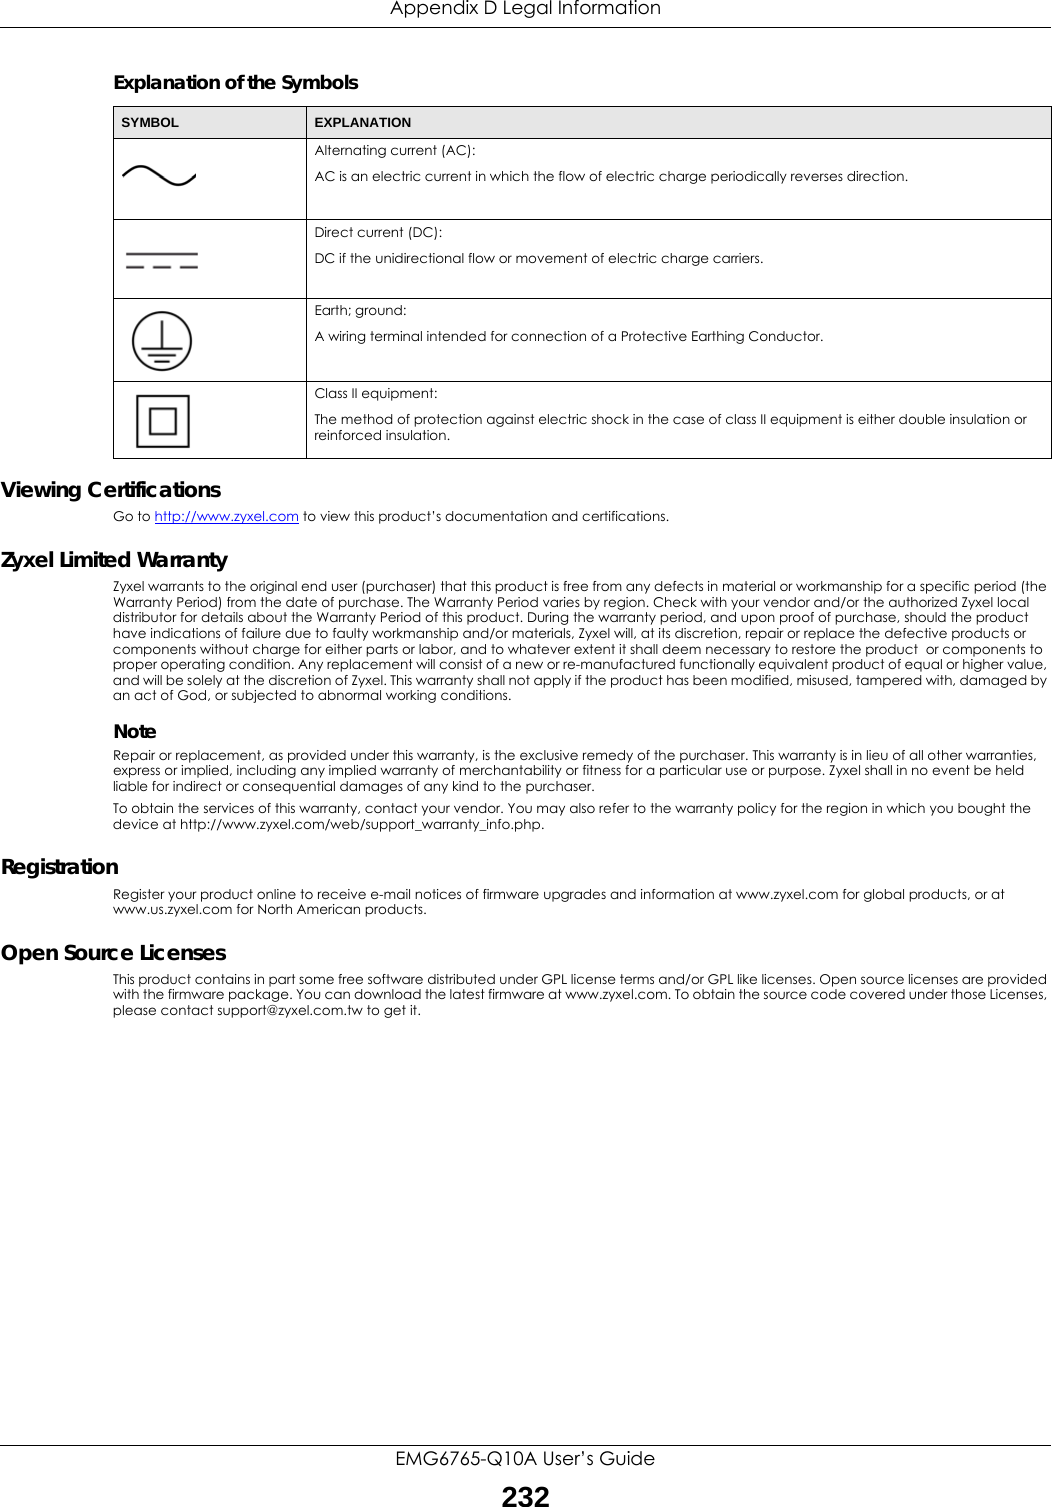 Appendix D Legal InformationEMG6765-Q10A User’s Guide232Explanation of the SymbolsViewing Certifications Go to http://www.zyxel.com to view this product’s documentation and certifications.Zyxel Limited Warranty Zyxel warrants to the original end user (purchaser) that this product is free from any defects in material or workmanship for a specific period (the Warranty Period) from the date of purchase. The Warranty Period varies by region. Check with your vendor and/or the authorized Zyxel local distributor for details about the Warranty Period of this product. During the warranty period, and upon proof of purchase, should the product have indications of failure due to faulty workmanship and/or materials, Zyxel will, at its discretion, repair or replace the defective products or components without charge for either parts or labor, and to whatever extent it shall deem necessary to restore the product  or components to proper operating condition. Any replacement will consist of a new or re-manufactured functionally equivalent product of equal or higher value, and will be solely at the discretion of Zyxel. This warranty shall not apply if the product has been modified, misused, tampered with, damaged by an act of God, or subjected to abnormal working conditions.NoteRepair or replacement, as provided under this warranty, is the exclusive remedy of the purchaser. This warranty is in lieu of all other warranties, express or implied, including any implied warranty of merchantability or fitness for a particular use or purpose. Zyxel shall in no event be held liable for indirect or consequential damages of any kind to the purchaser.To obtain the services of this warranty, contact your vendor. You may also refer to the warranty policy for the region in which you bought the device at http://www.zyxel.com/web/support_warranty_info.php.Registration Register your product online to receive e-mail notices of firmware upgrades and information at www.zyxel.com for global products, or at www.us.zyxel.com for North American products.Open Source Licenses This product contains in part some free software distributed under GPL license terms and/or GPL like licenses. Open source licenses are provided with the firmware package. You can download the latest firmware at www.zyxel.com. To obtain the source code covered under those Licenses, please contact support@zyxel.com.tw to get it. SYMBOL EXPLANATIONAlternating current (AC):AC is an electric current in which the flow of electric charge periodically reverses direction.Direct current (DC):DC if the unidirectional flow or movement of electric charge carriers.Earth; ground:A wiring terminal intended for connection of a Protective Earthing Conductor.Class II equipment:The method of protection against electric shock in the case of class II equipment is either double insulation or reinforced insulation.  